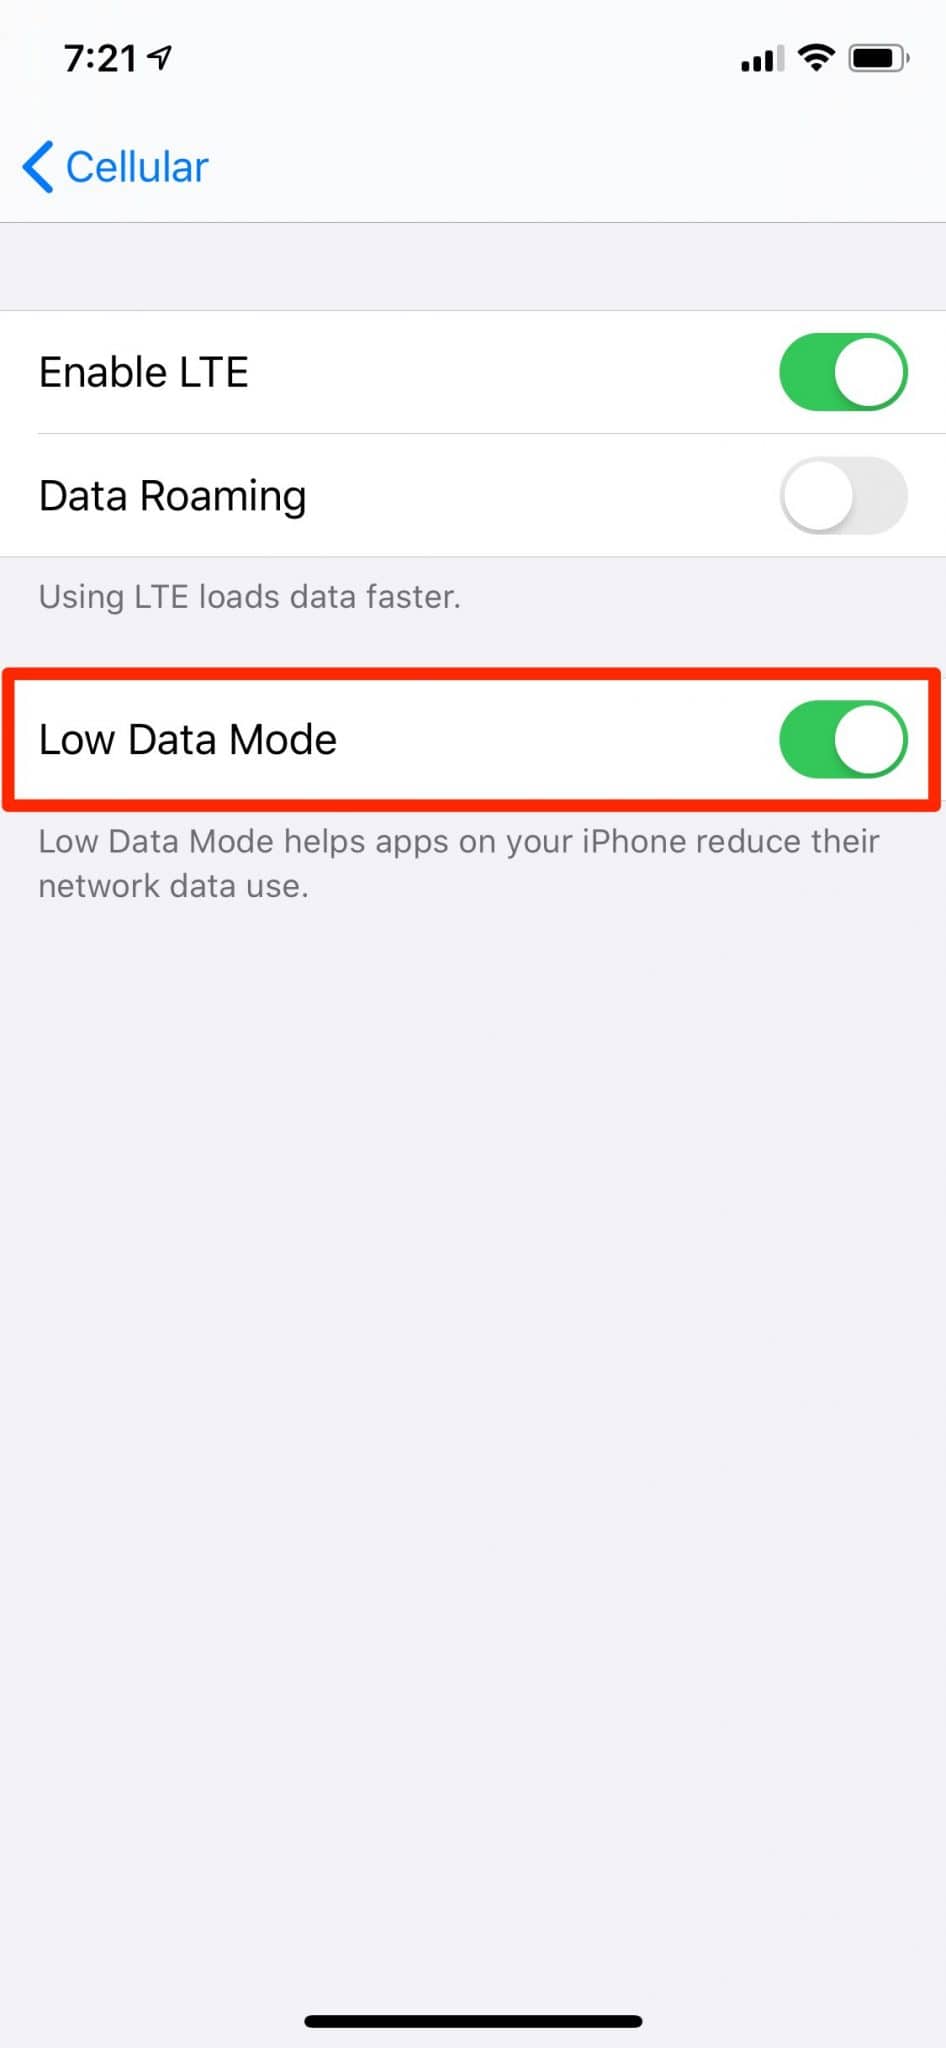 Enable Cellular Low Data Mode